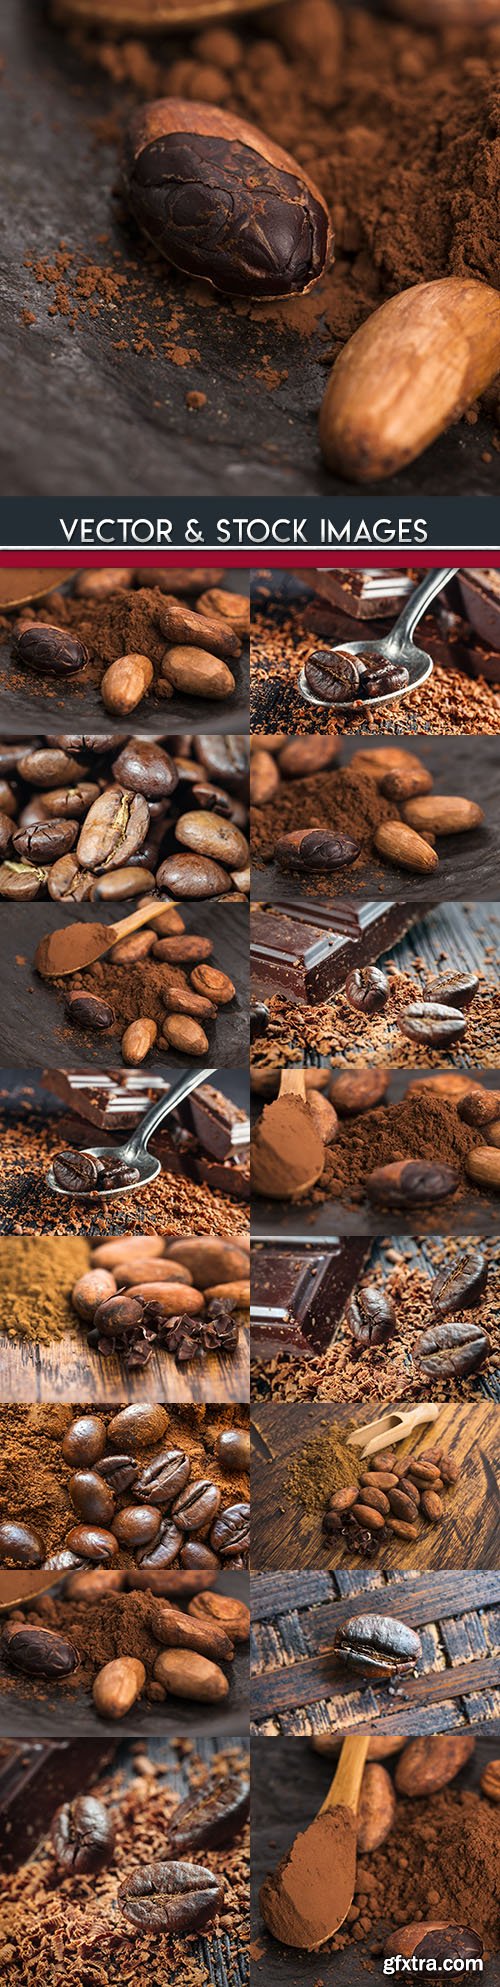 Cocoa beans and flavored roasted coffee grains